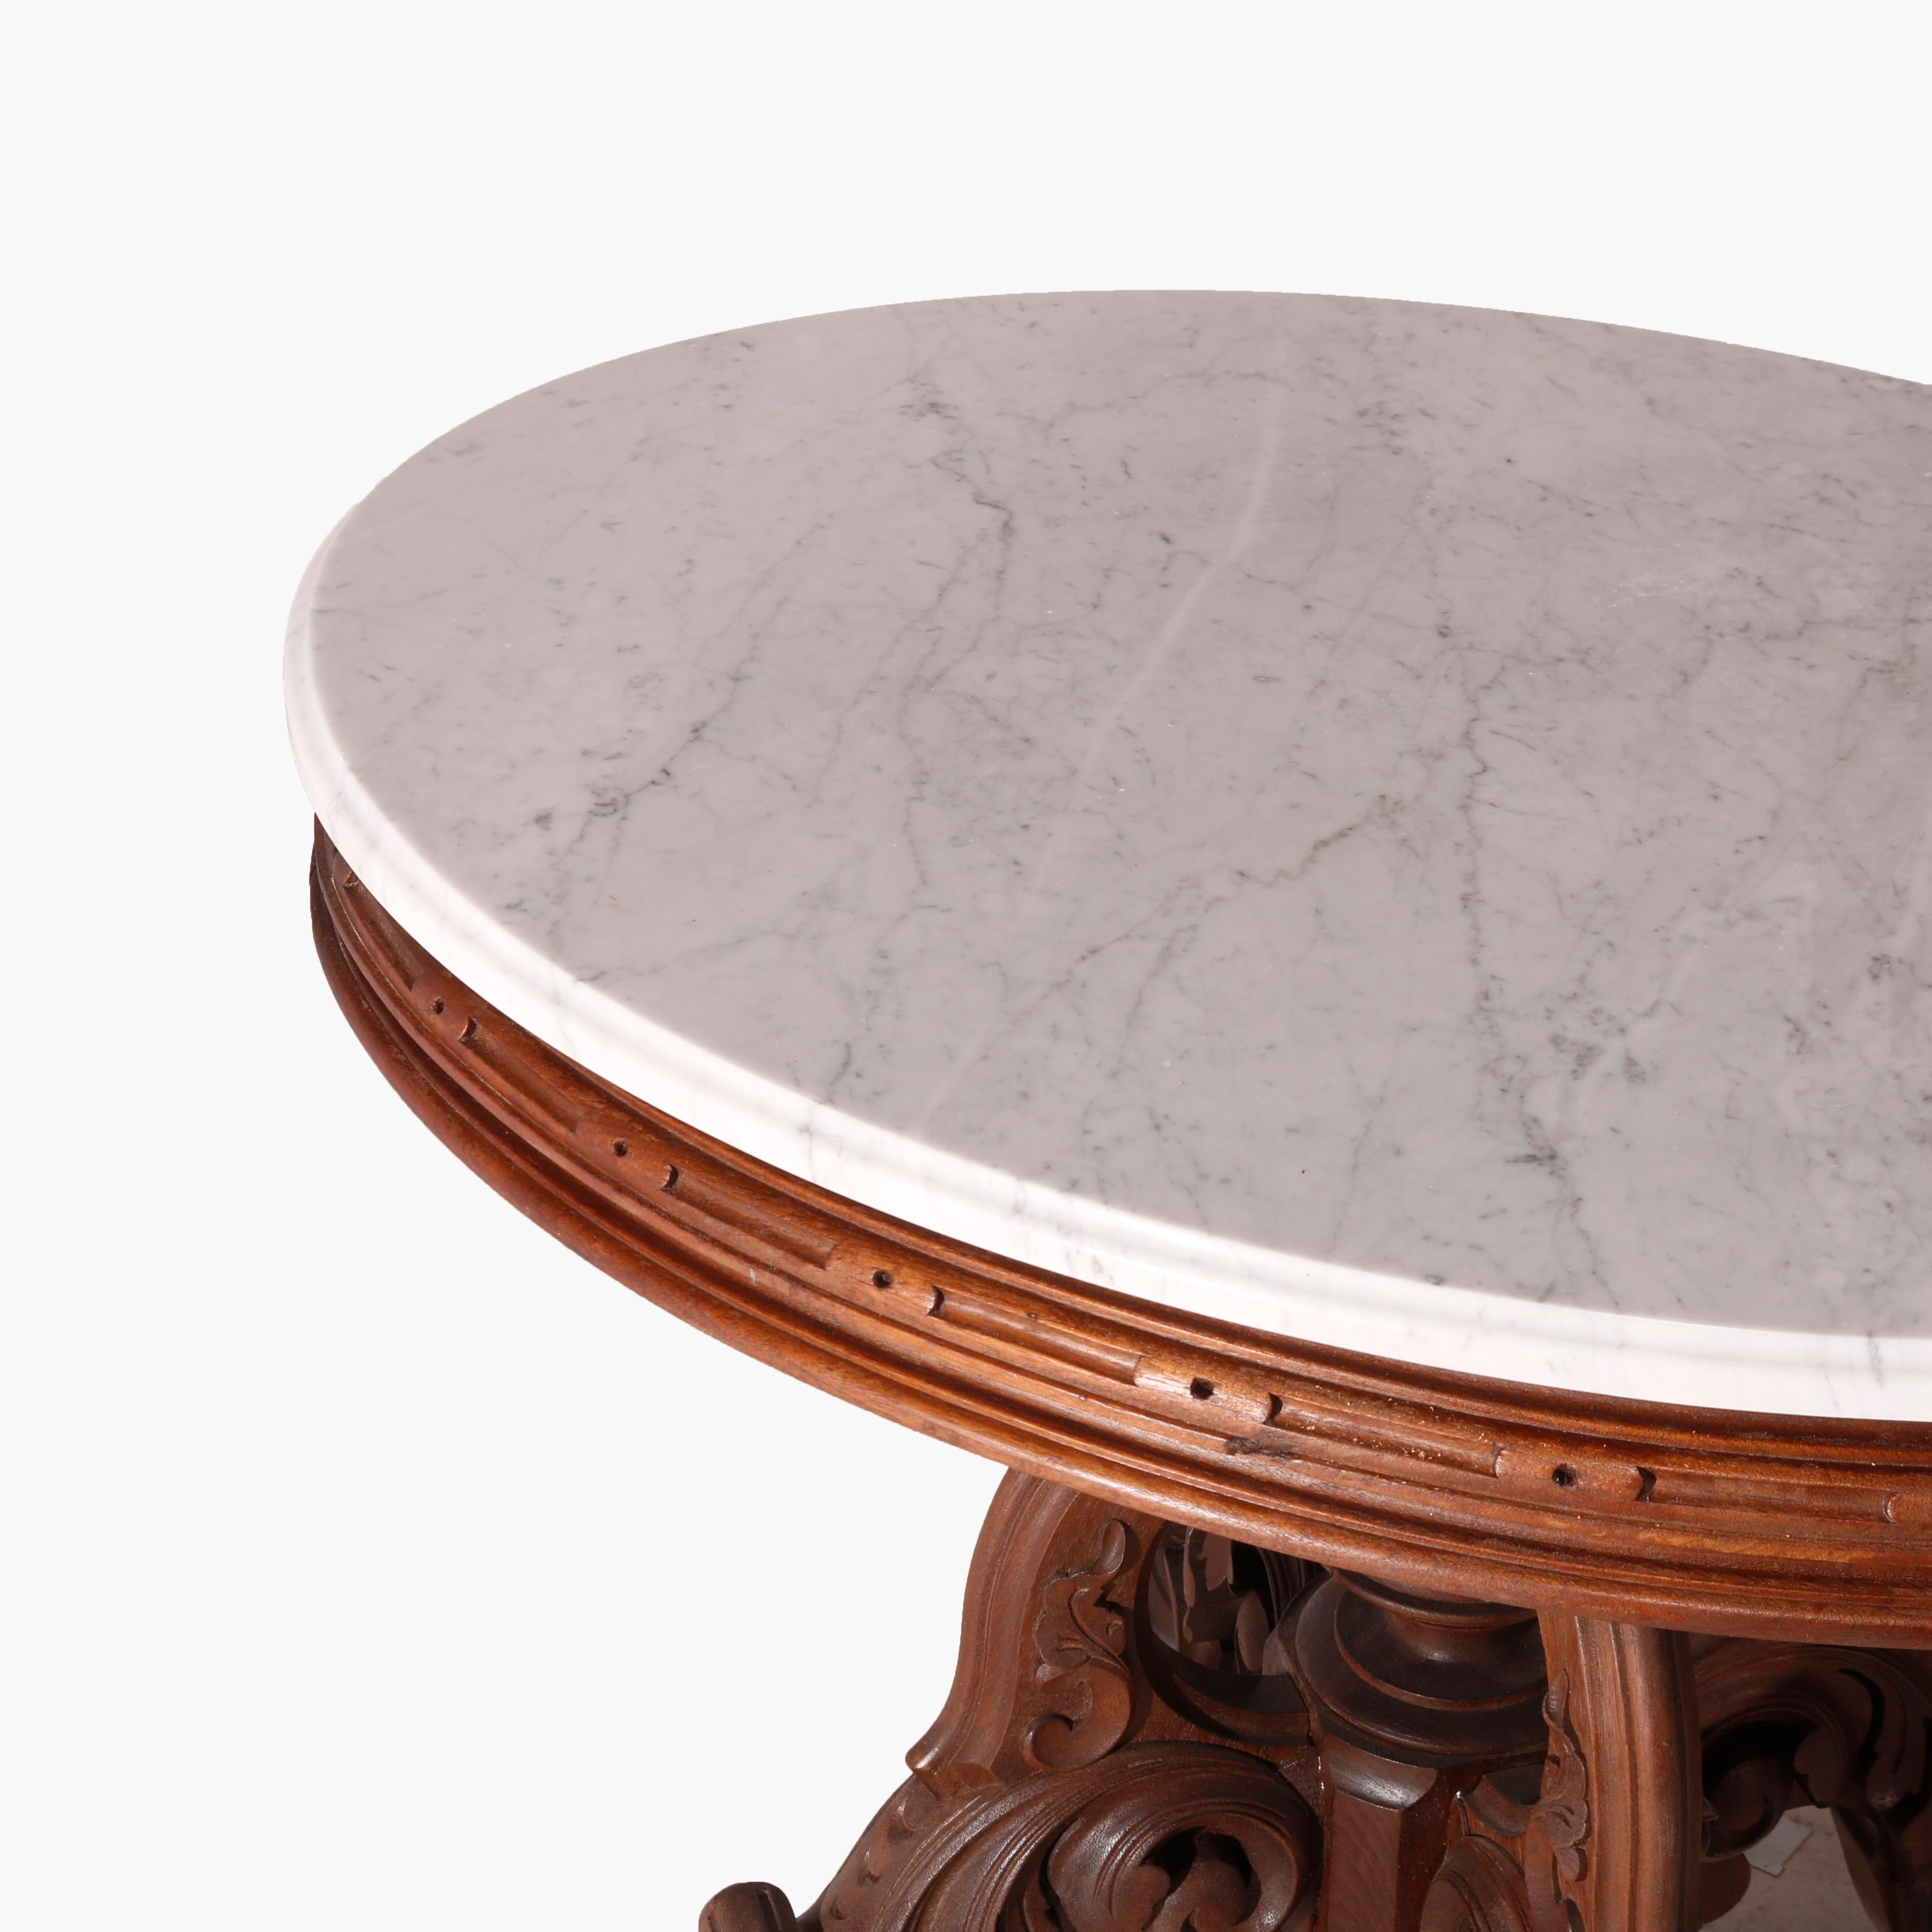 Carved Oversized Antique Victorian Walnut Brooks Oval Marble Top Parlor Table 1890 For Sale